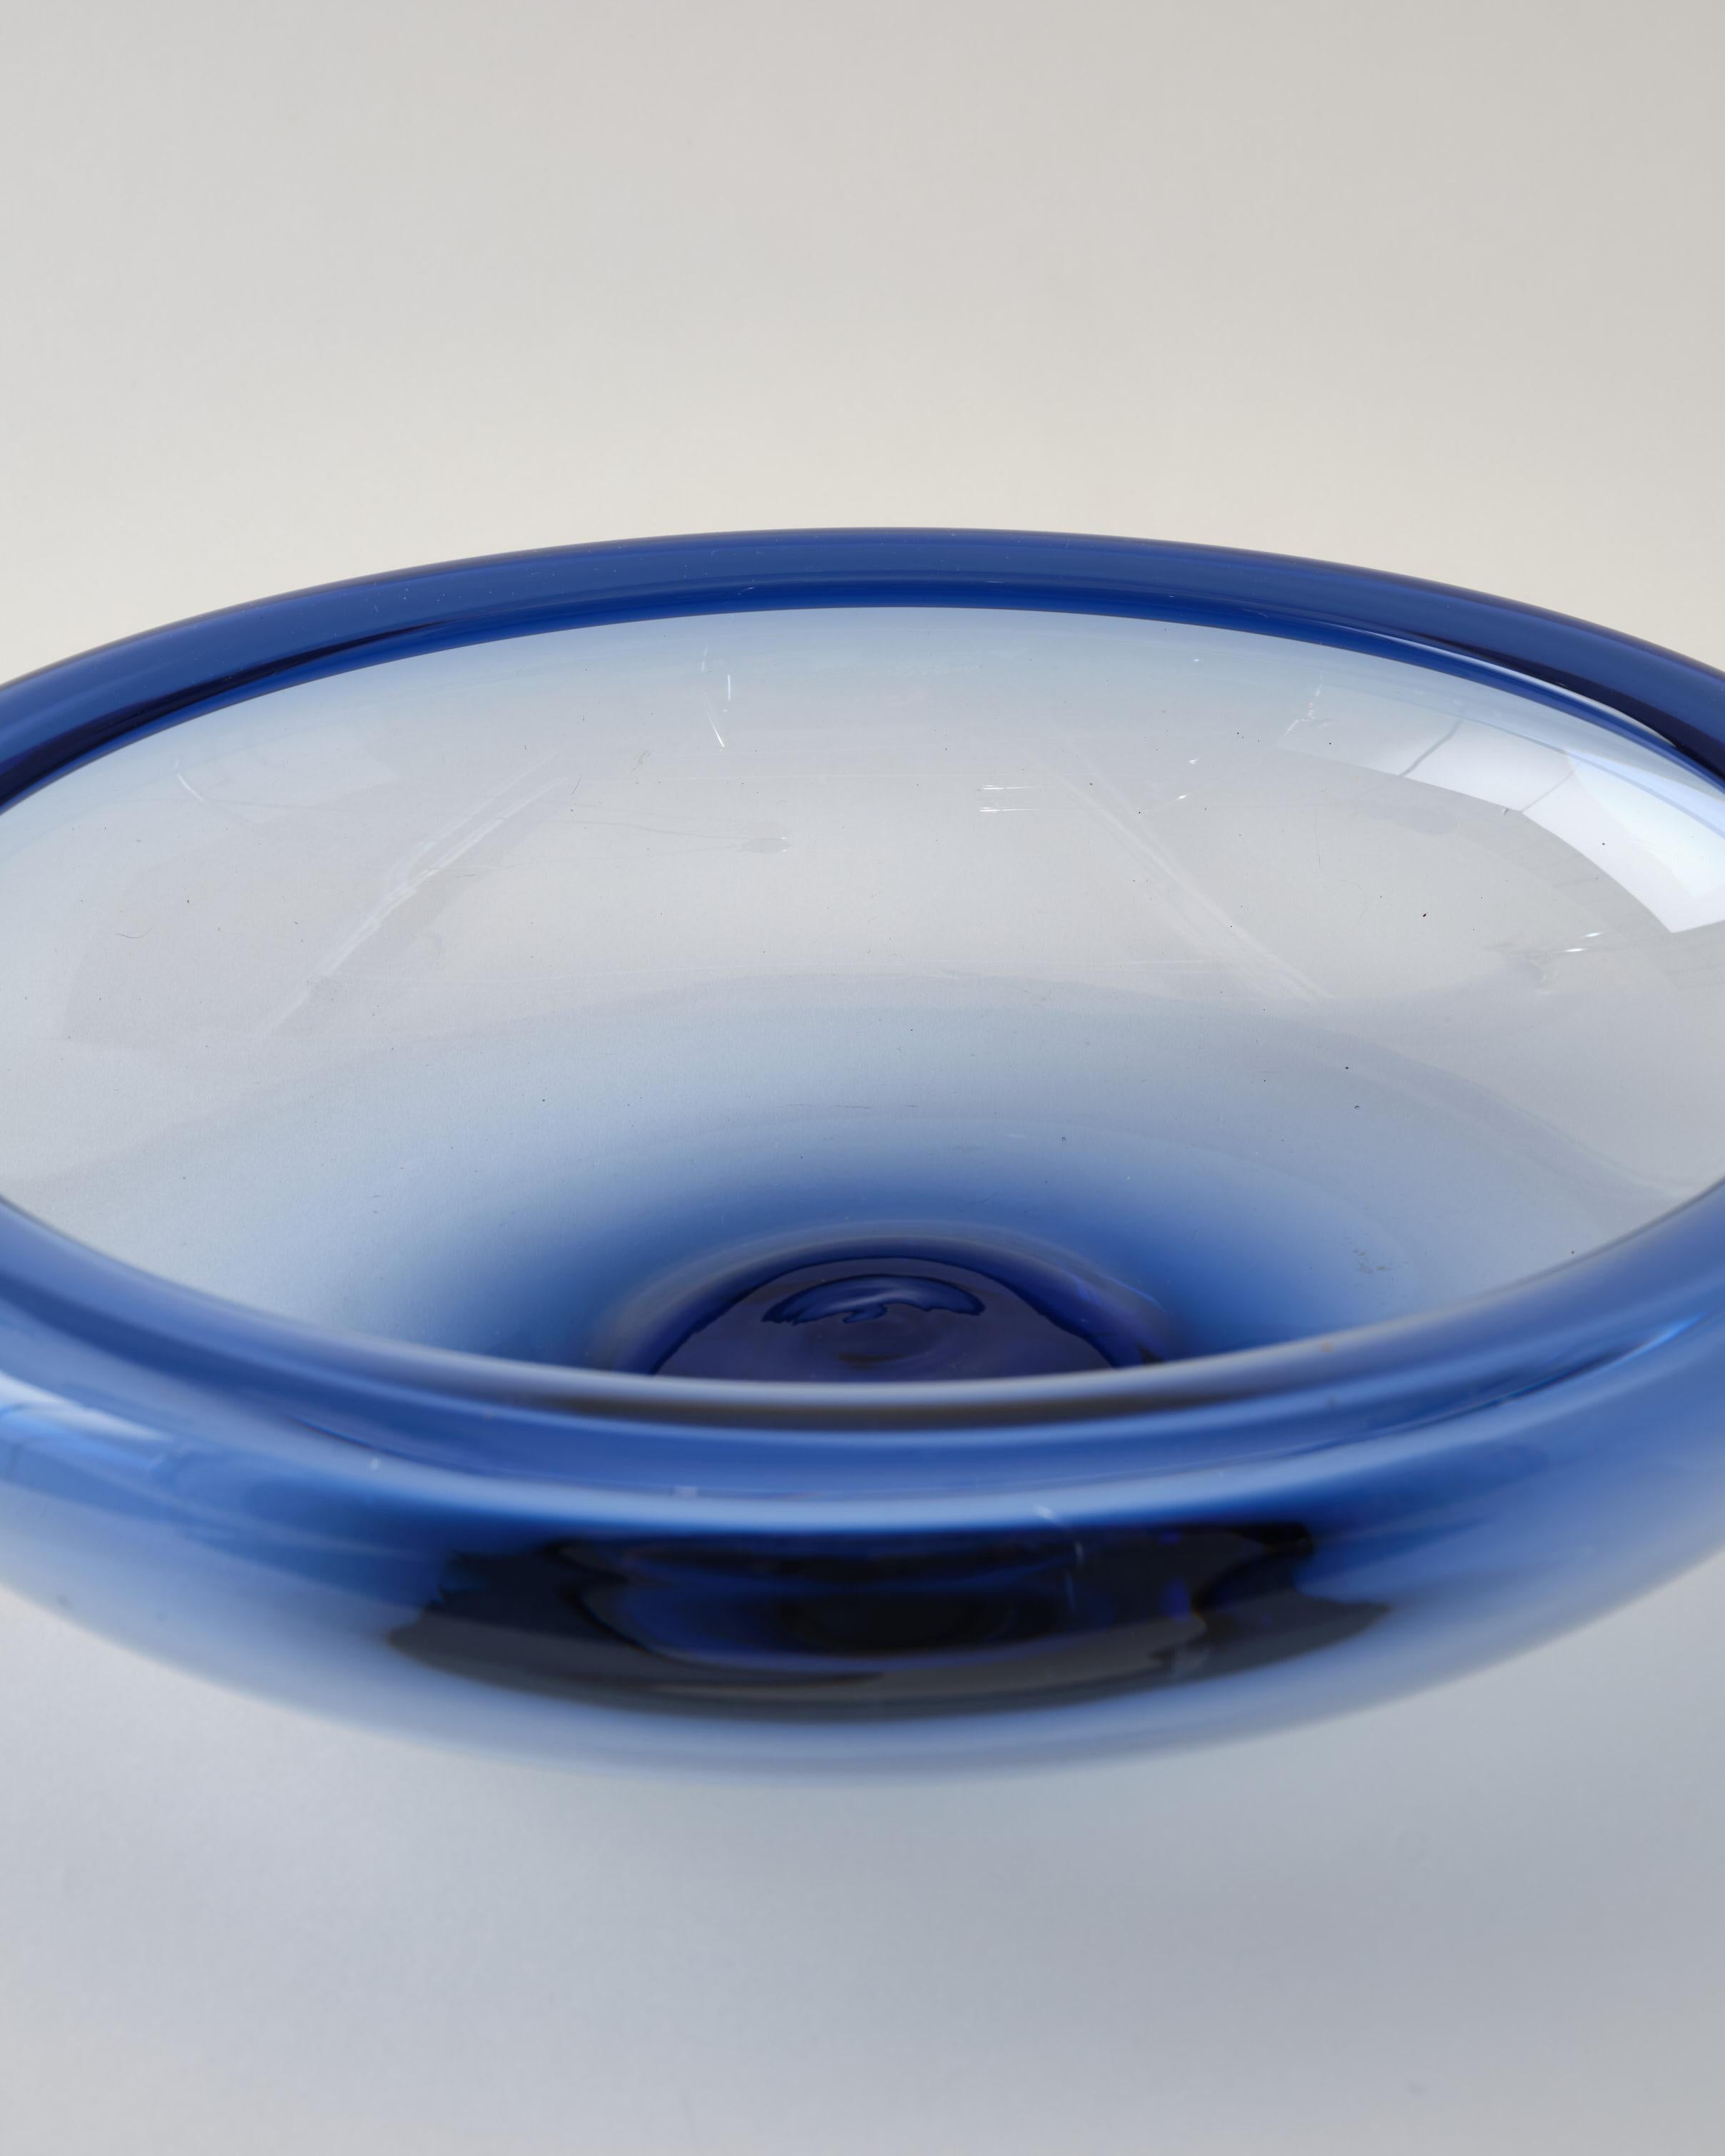 Large, beautiful glass bowl by Holmegaard, Denmark, C 1960. The item is signed. It was produced in the 1960's. It is in very good condition.
Glass is light color blue and the shape is a round large bowl.